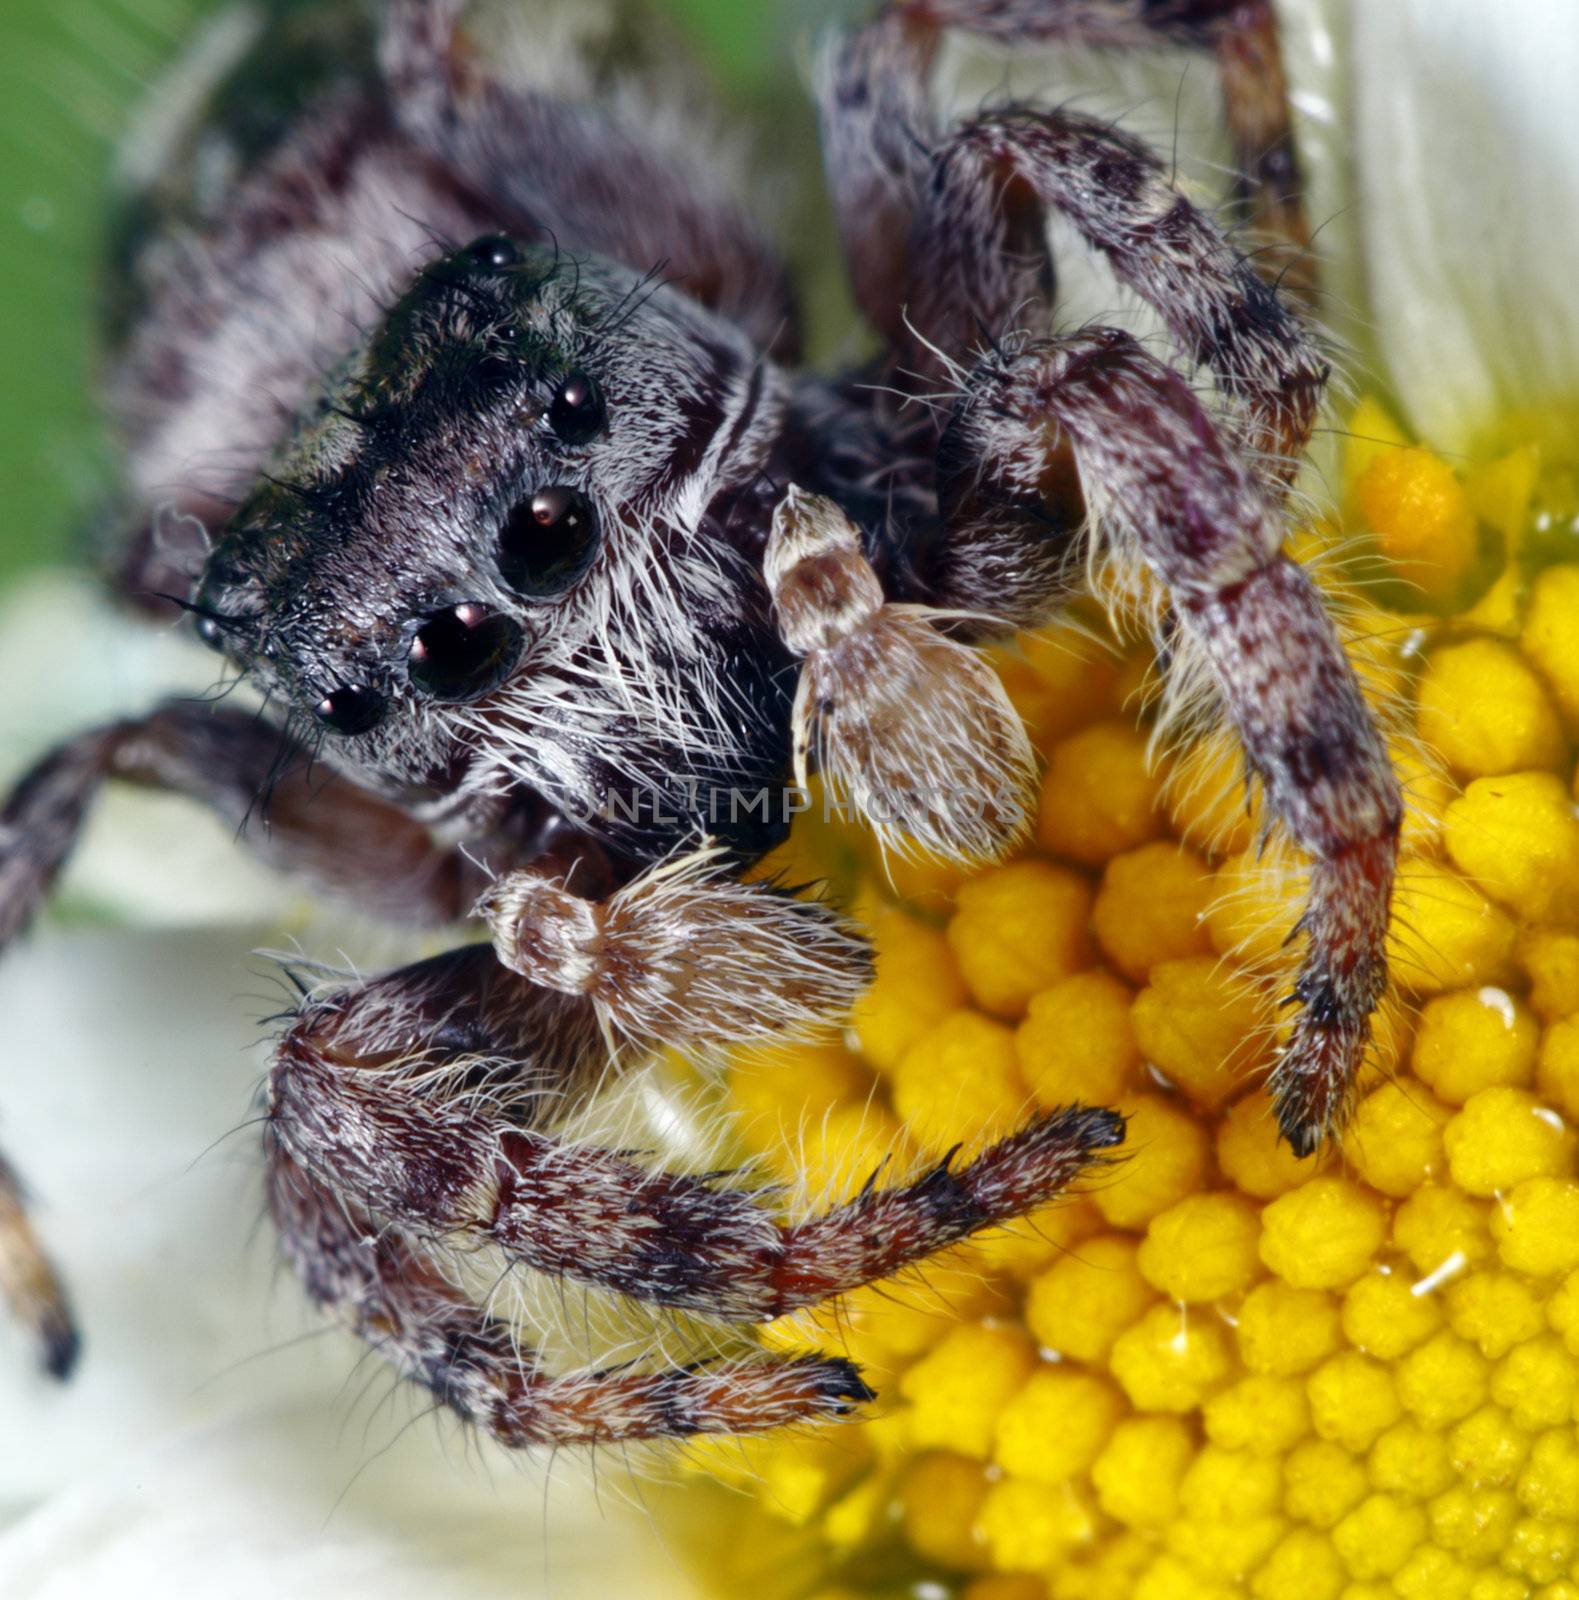 A macro shot of a jumping spider on a flower. This tiny little guys was less than a quarter inch long. Known for their eye patterns and jumping capabilities, jumping spiders have been known to jump 80 times their body length in distance.